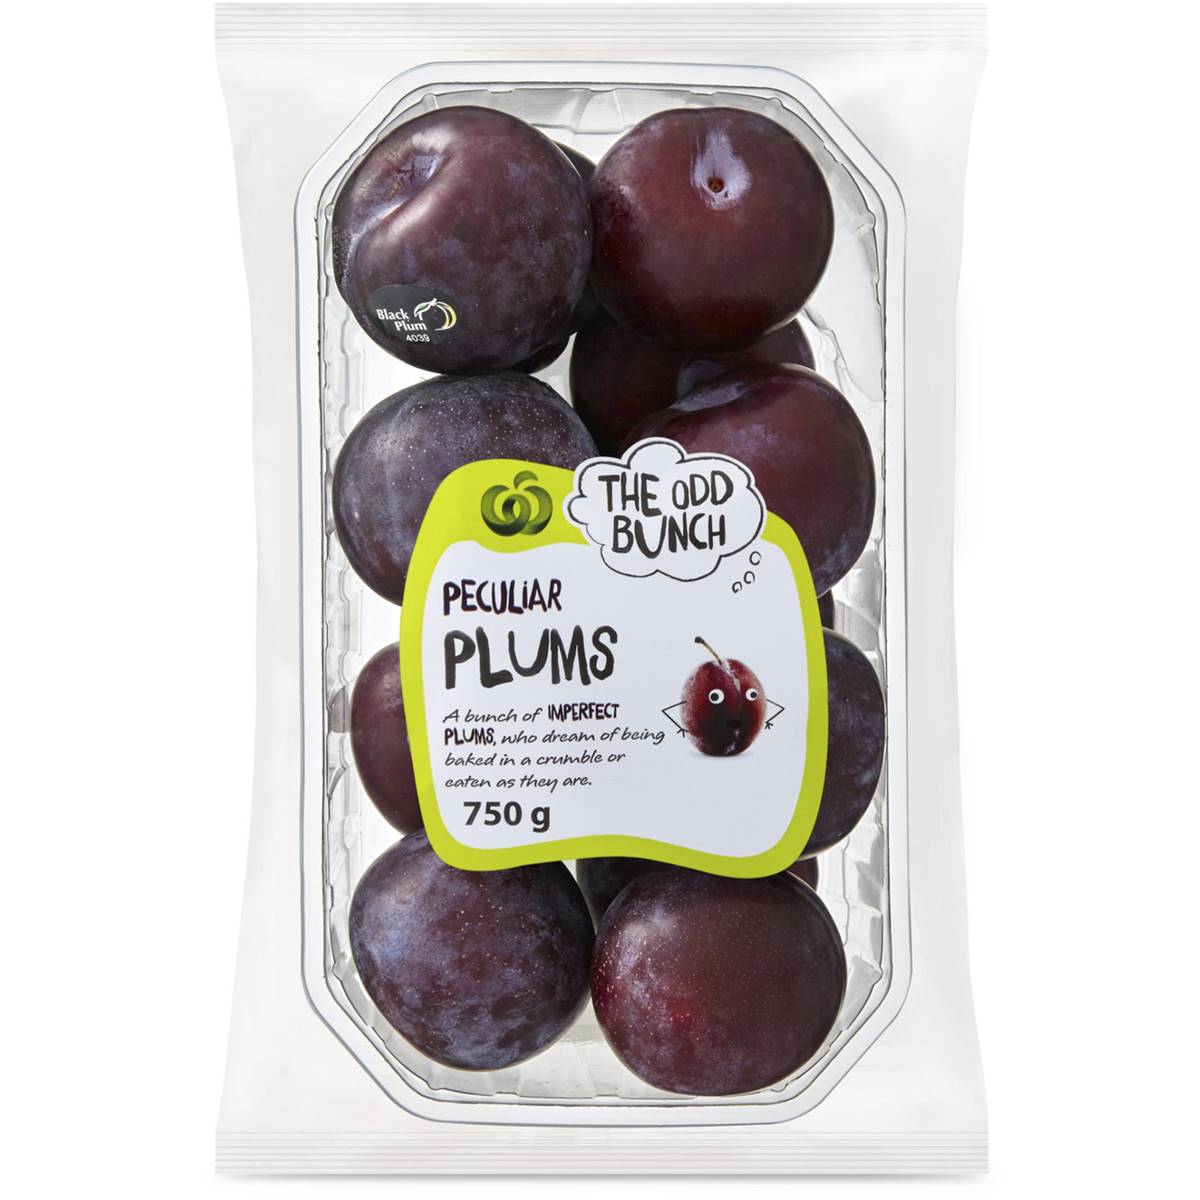 Calories in The Odd Bunch Plum Punnet